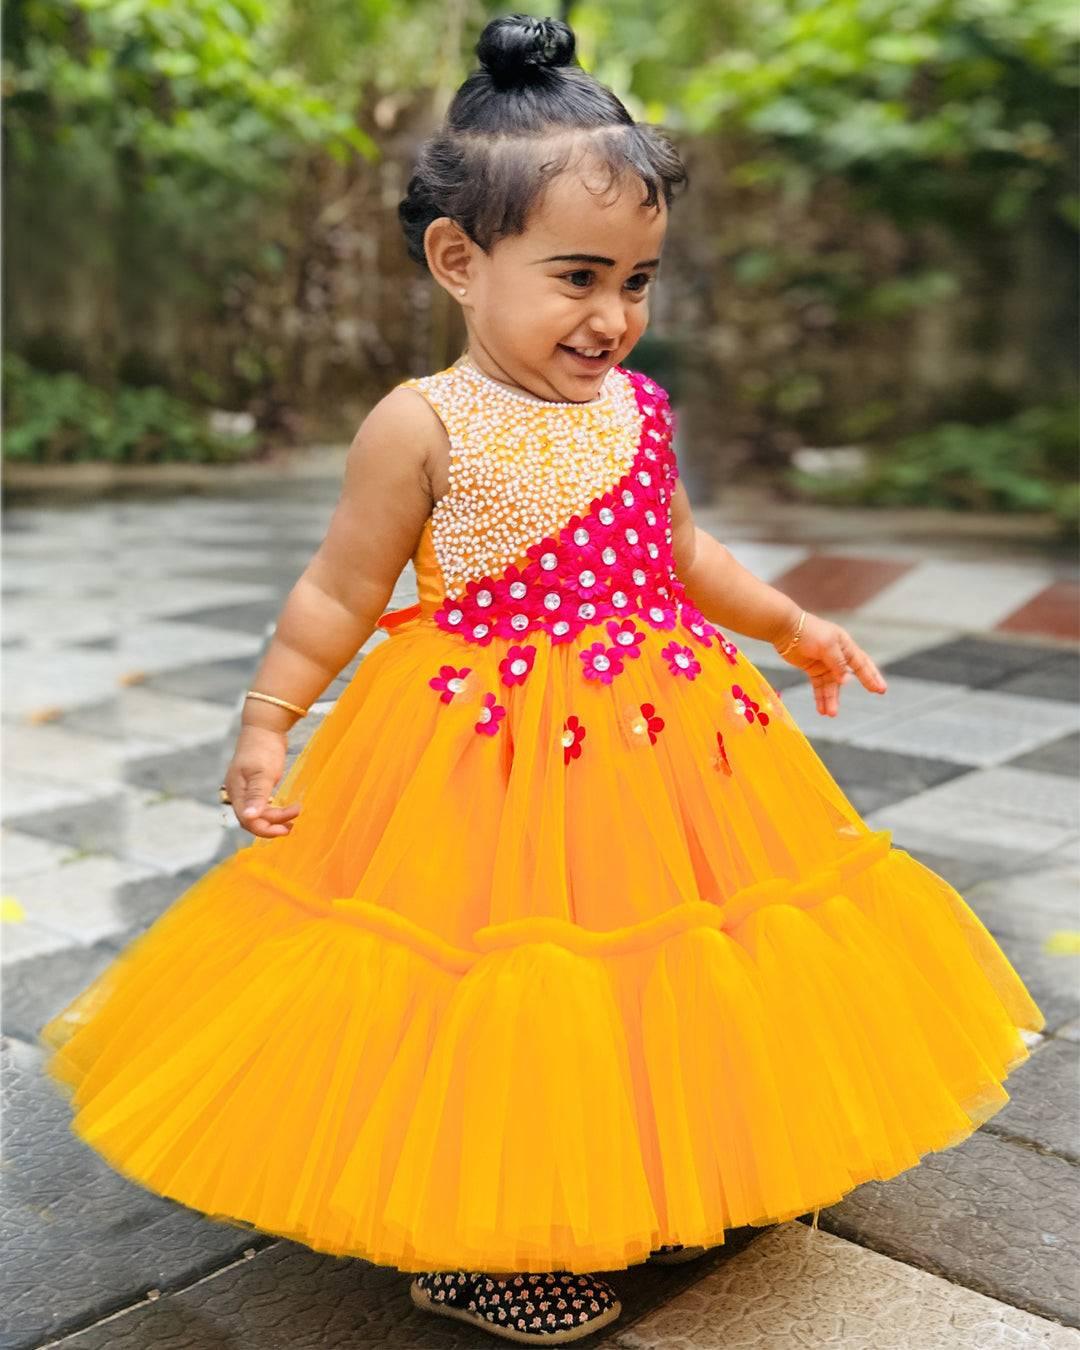 Mango Yellow & Magenta combo Handwork Flower Frock
Material: Mango yellow colour net is used to make this elegant dress. Magenta colour satin flowers are spreaded on one side of the frock. Another side of the frock 